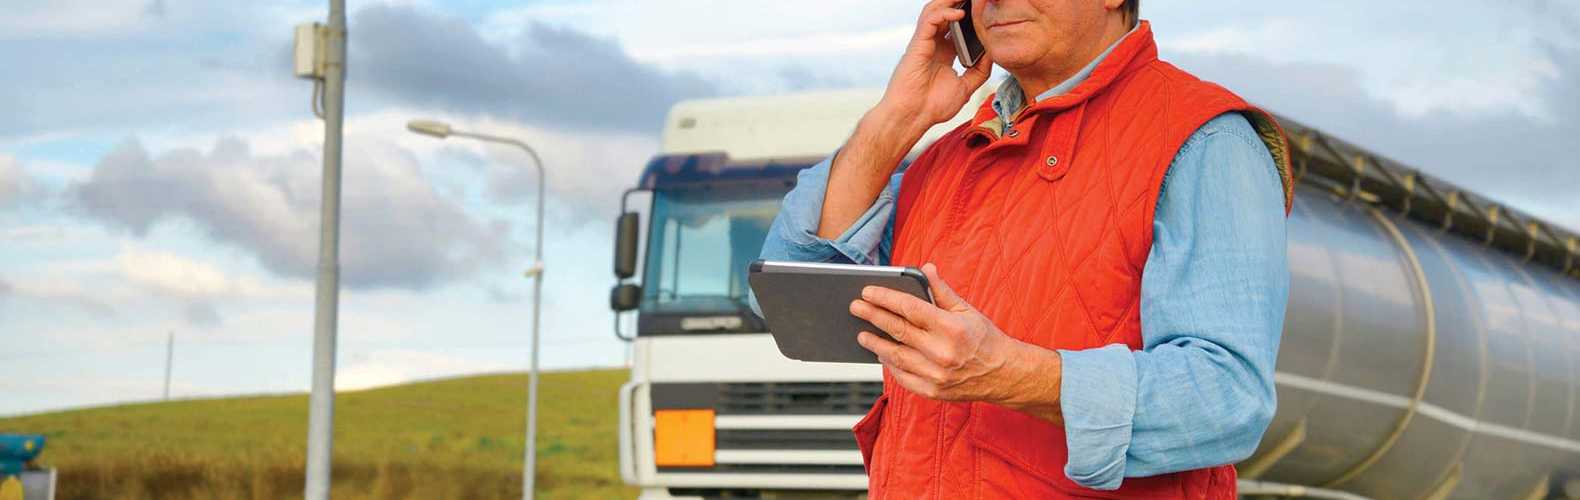 Attracting and Retaining Commercial Drivers